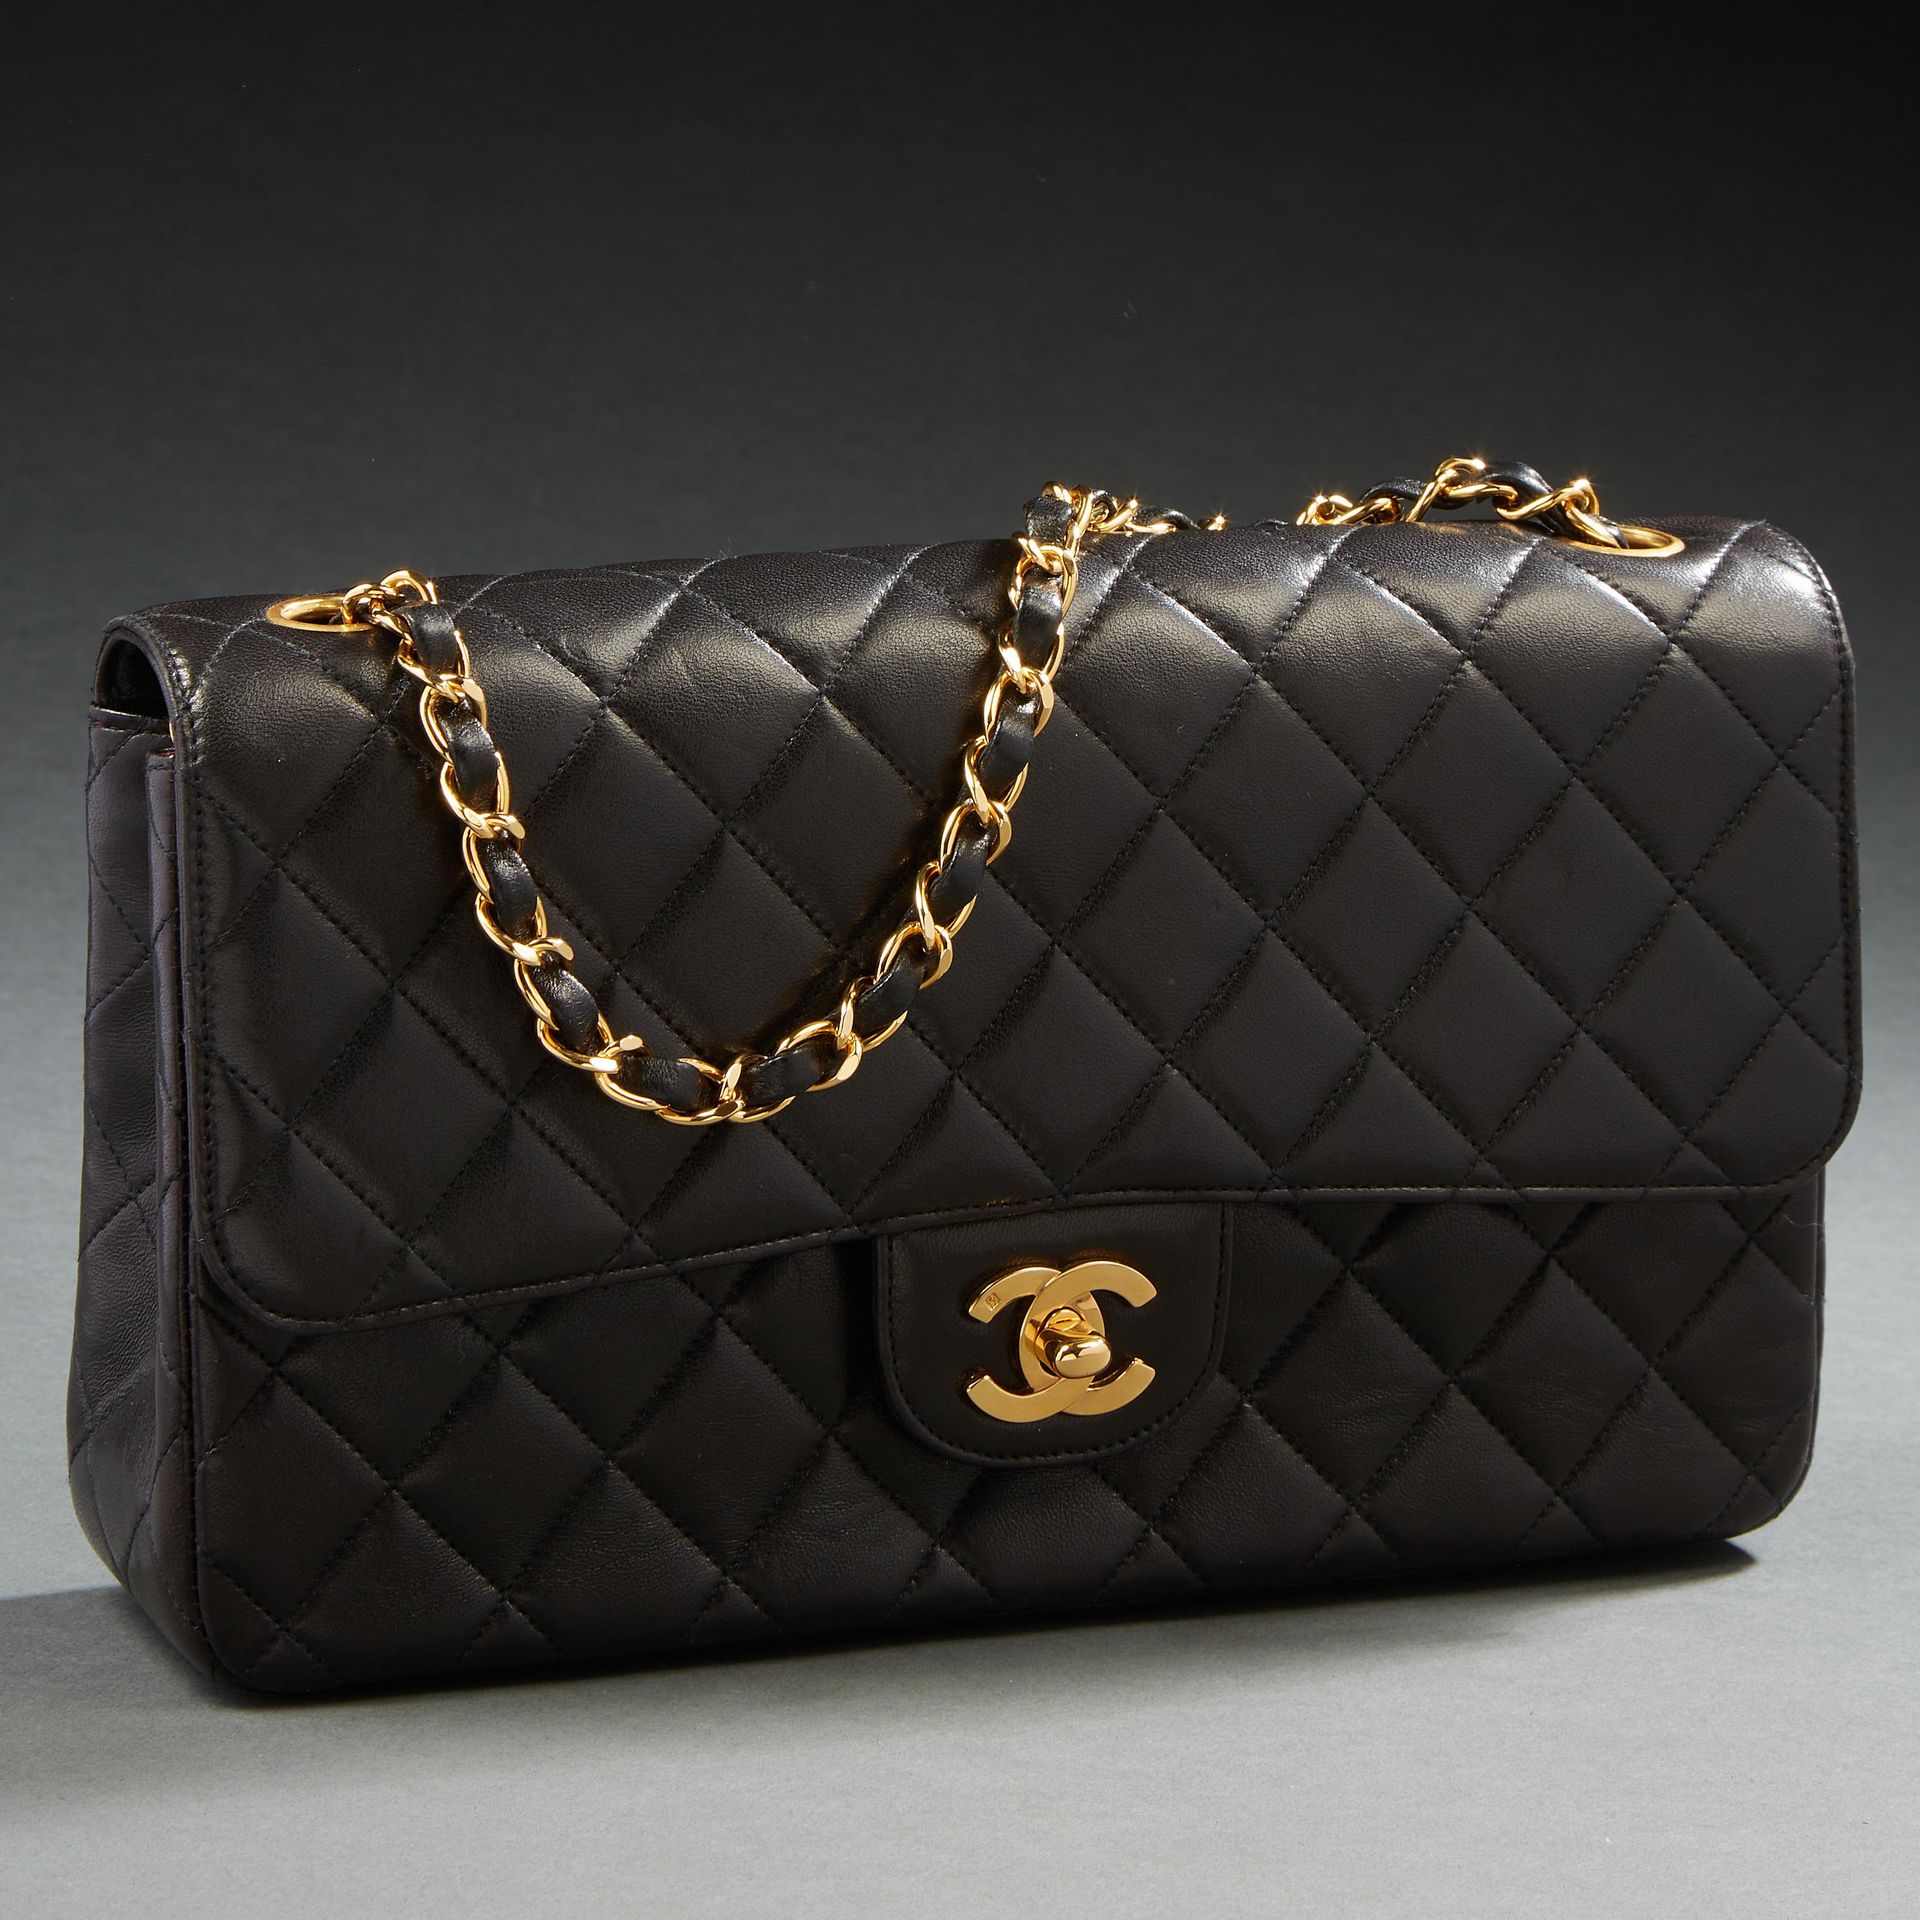 CHANEL Lambskin/Gold-Tone Metal Mini Flap Bag with Top Handle for